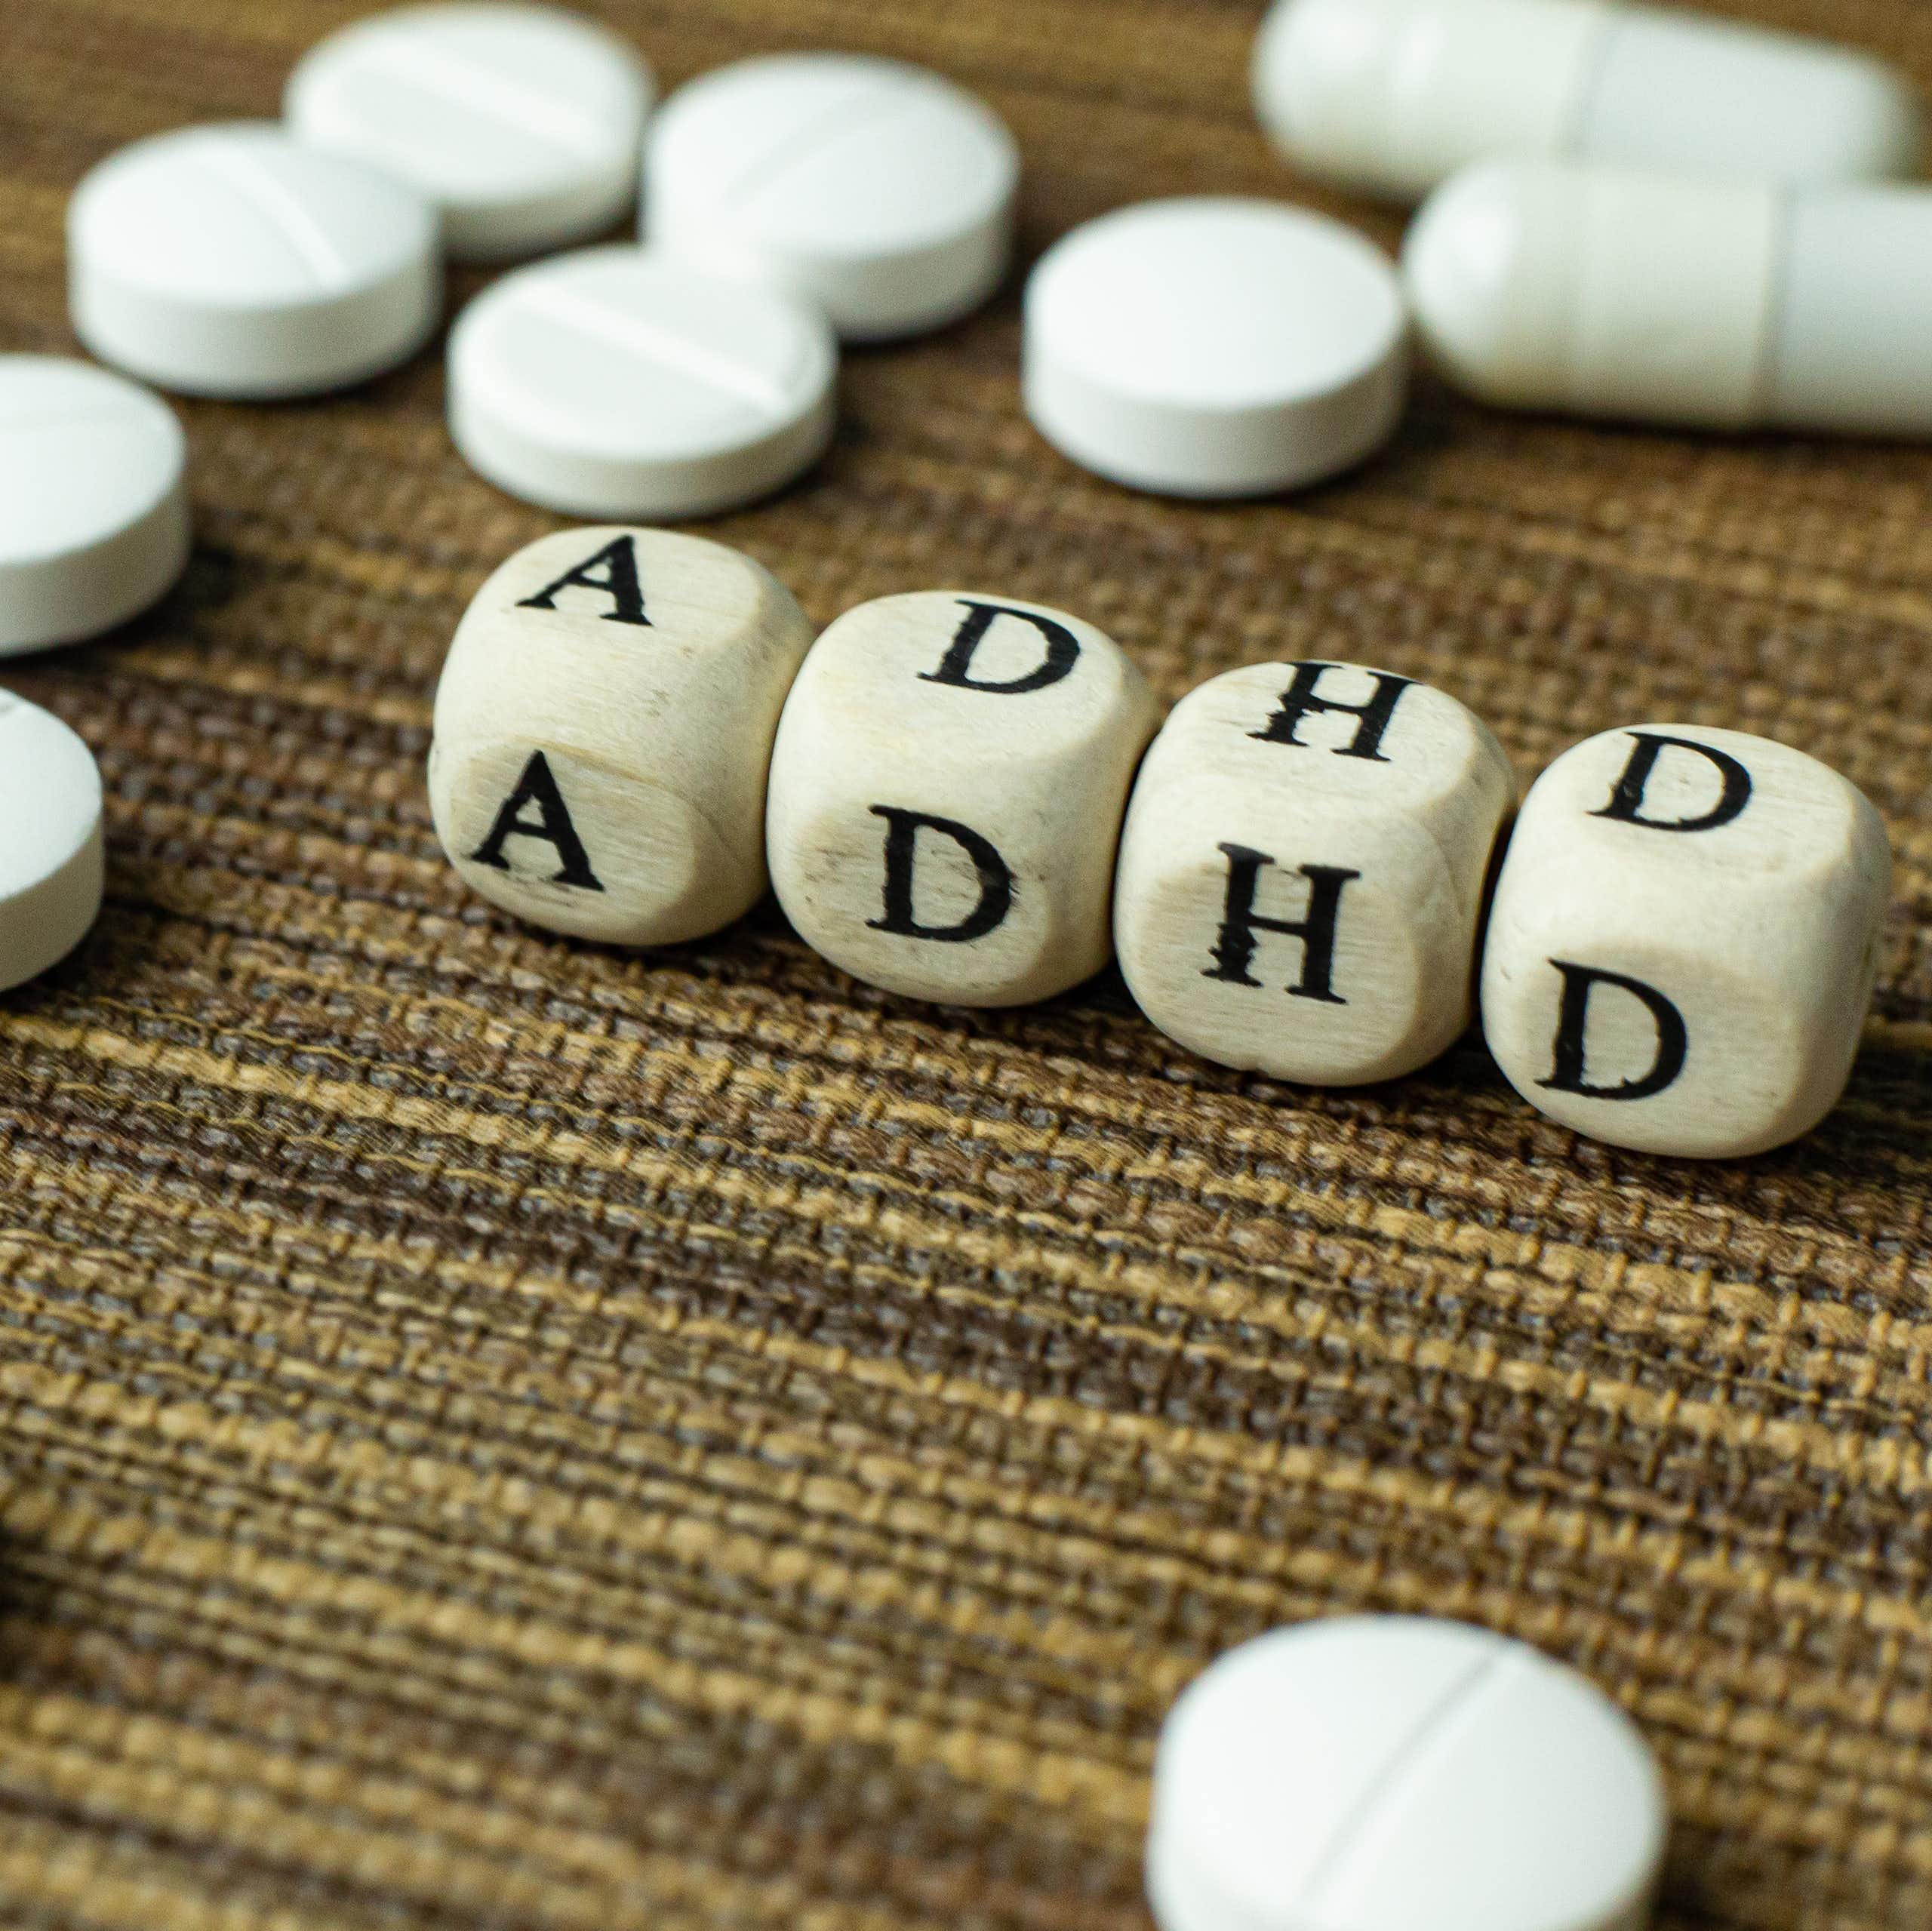 ADHD letters surrounded by pills